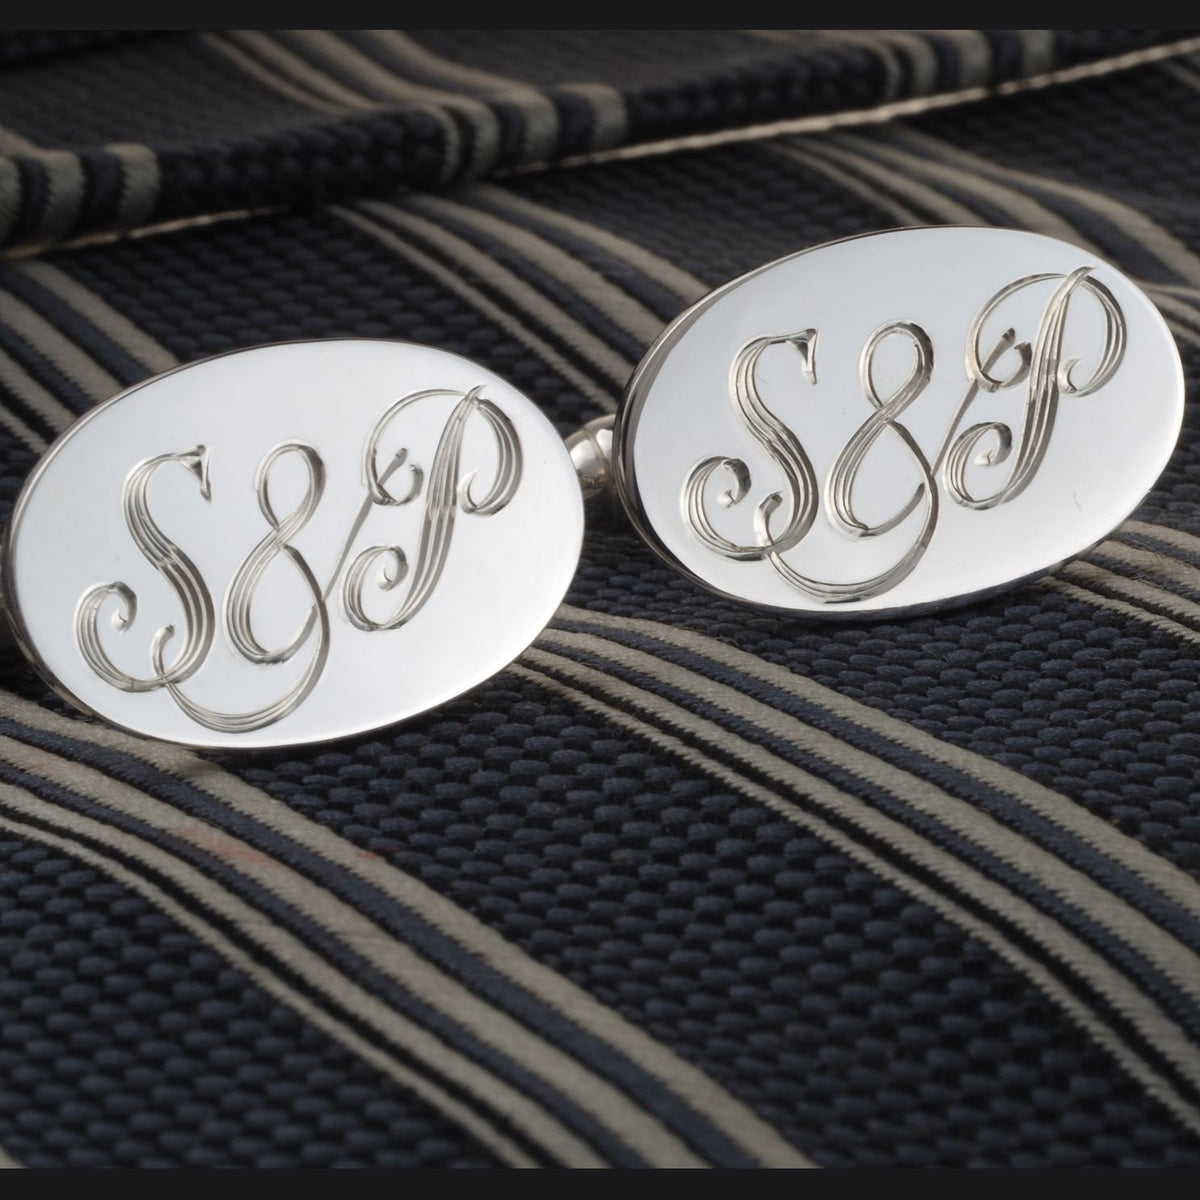 Personalised Sterling Silver Oval Cufflinks Hand Engraved Initials